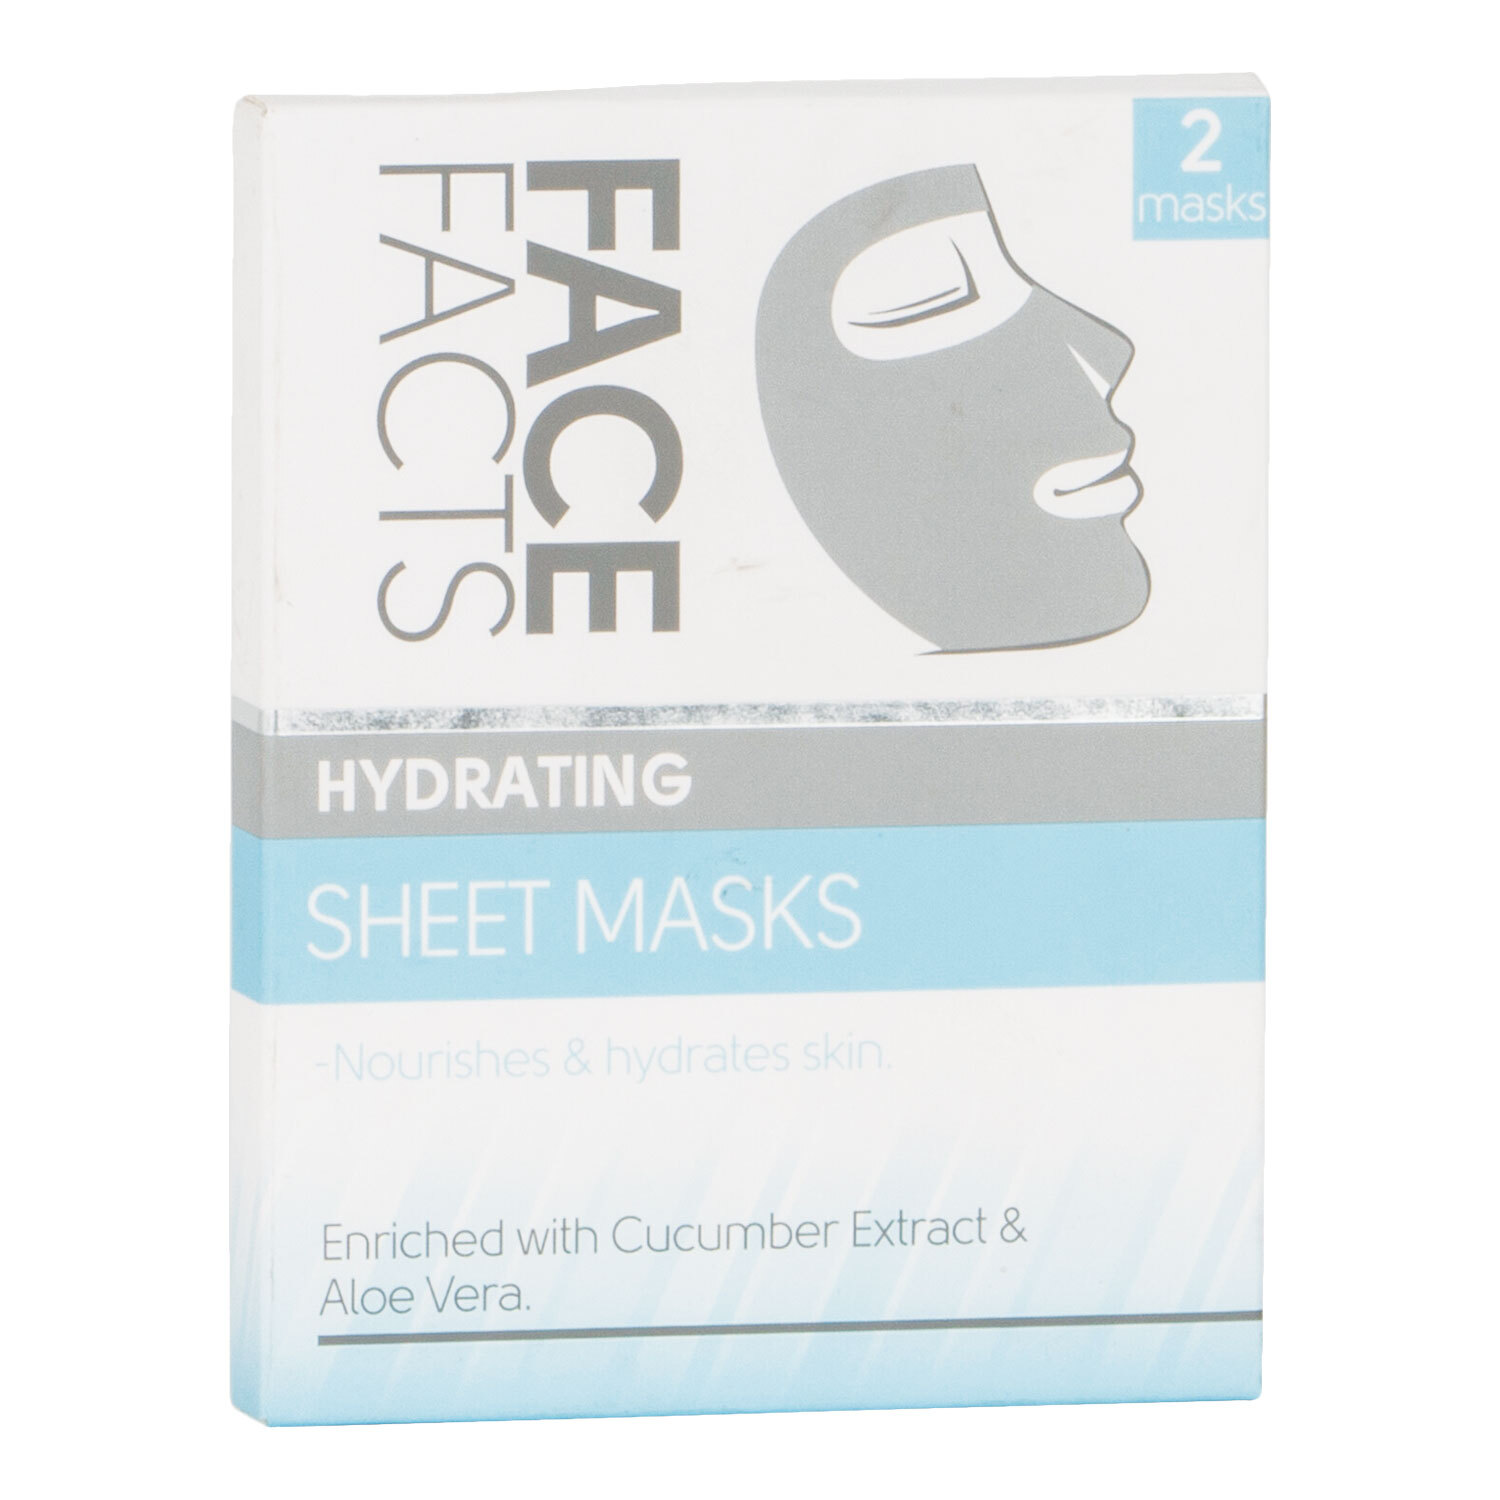 Face Facts Hydrating Sheet Mask Image